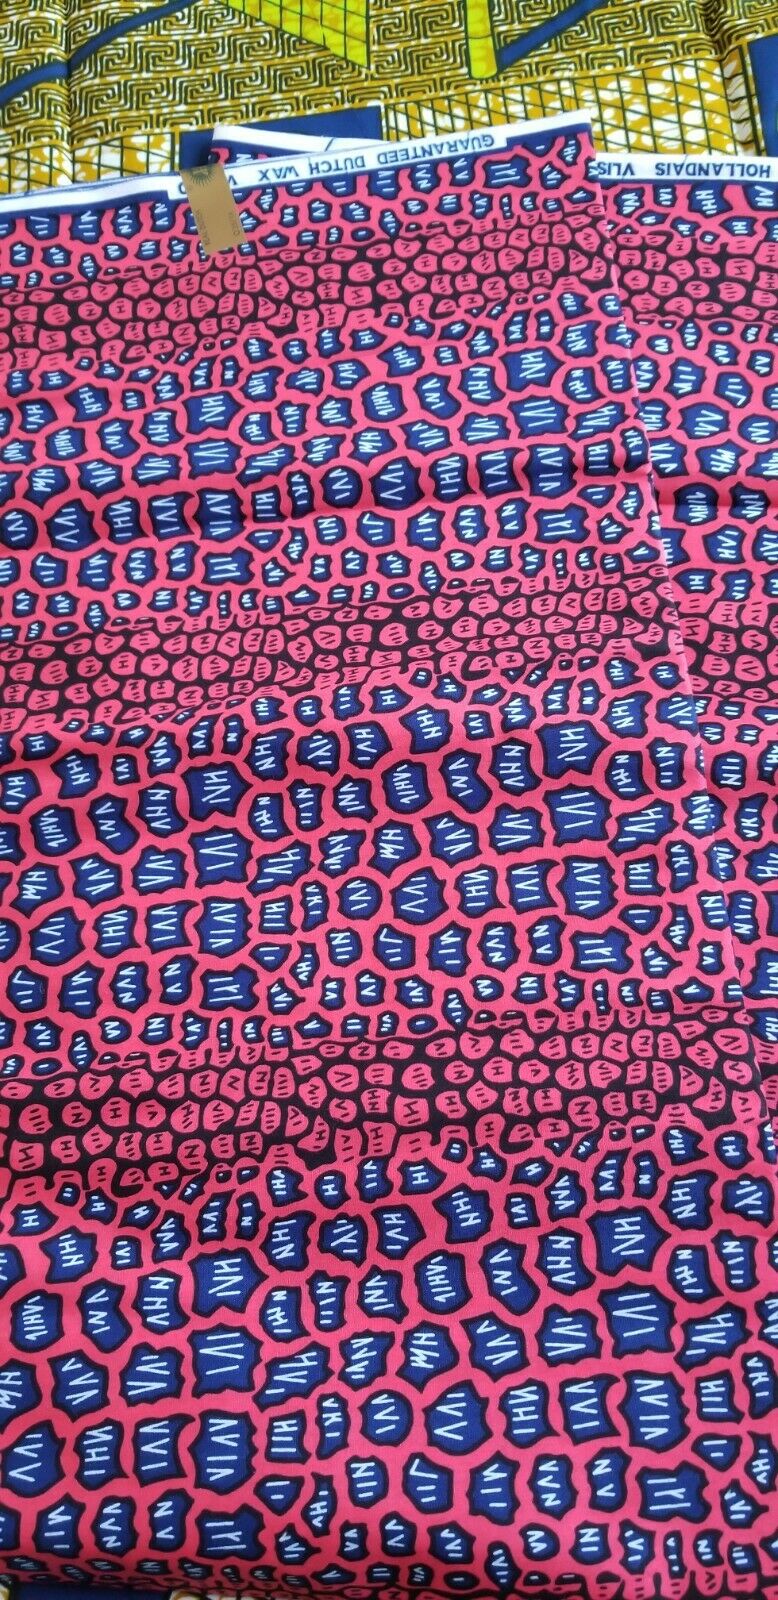 Assorted Multi African fabric 100% Cotton per yard~select your choice $5.50 /yd